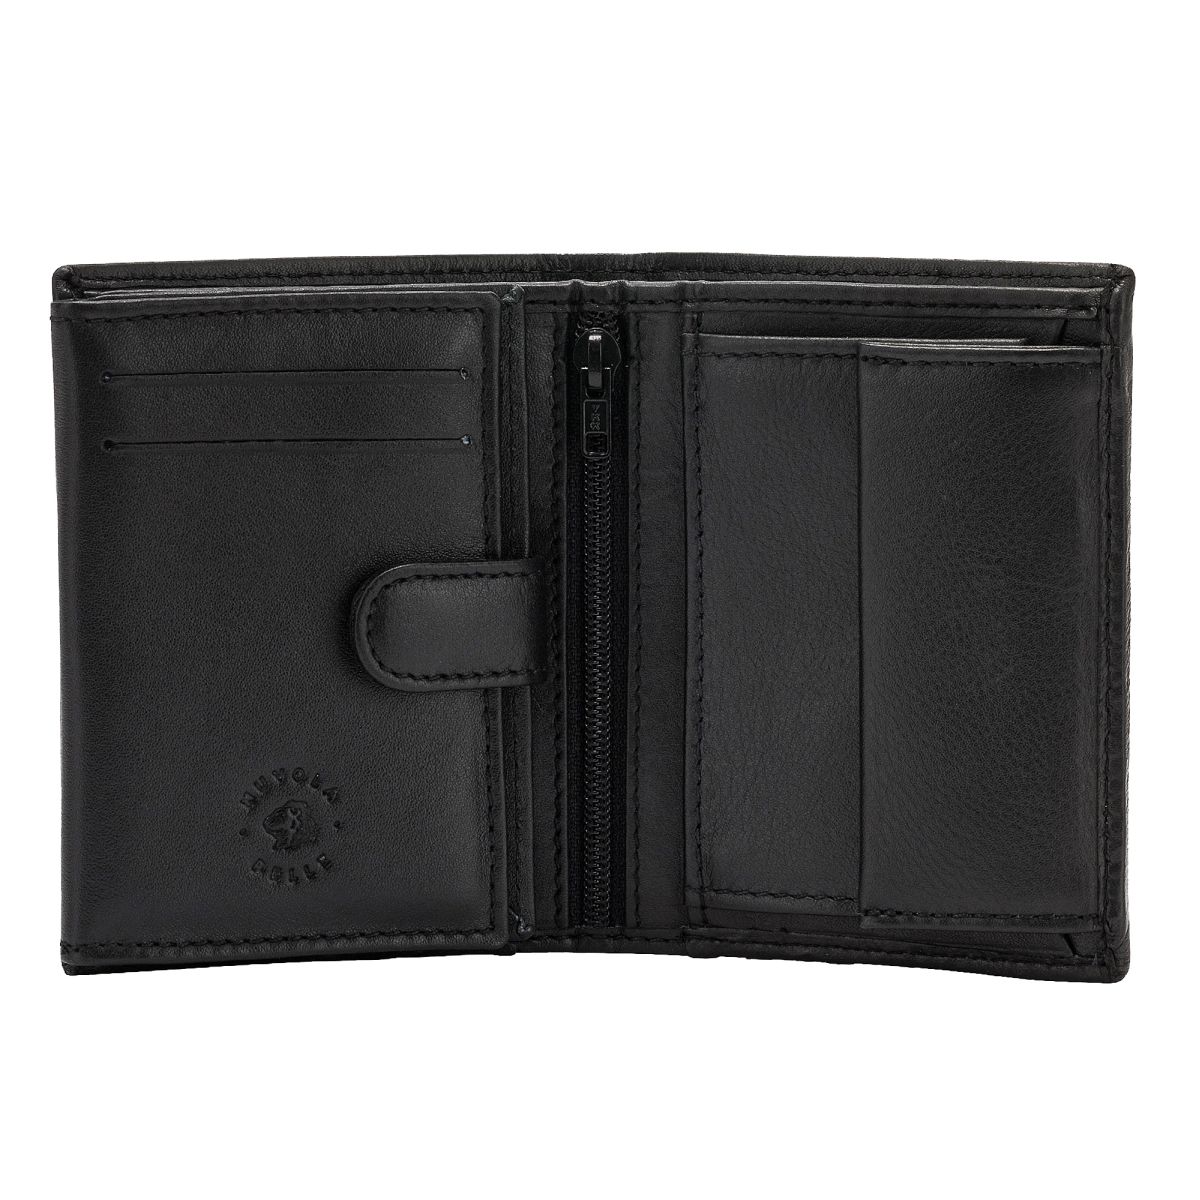 Small mens wallet with coin pocket - Black